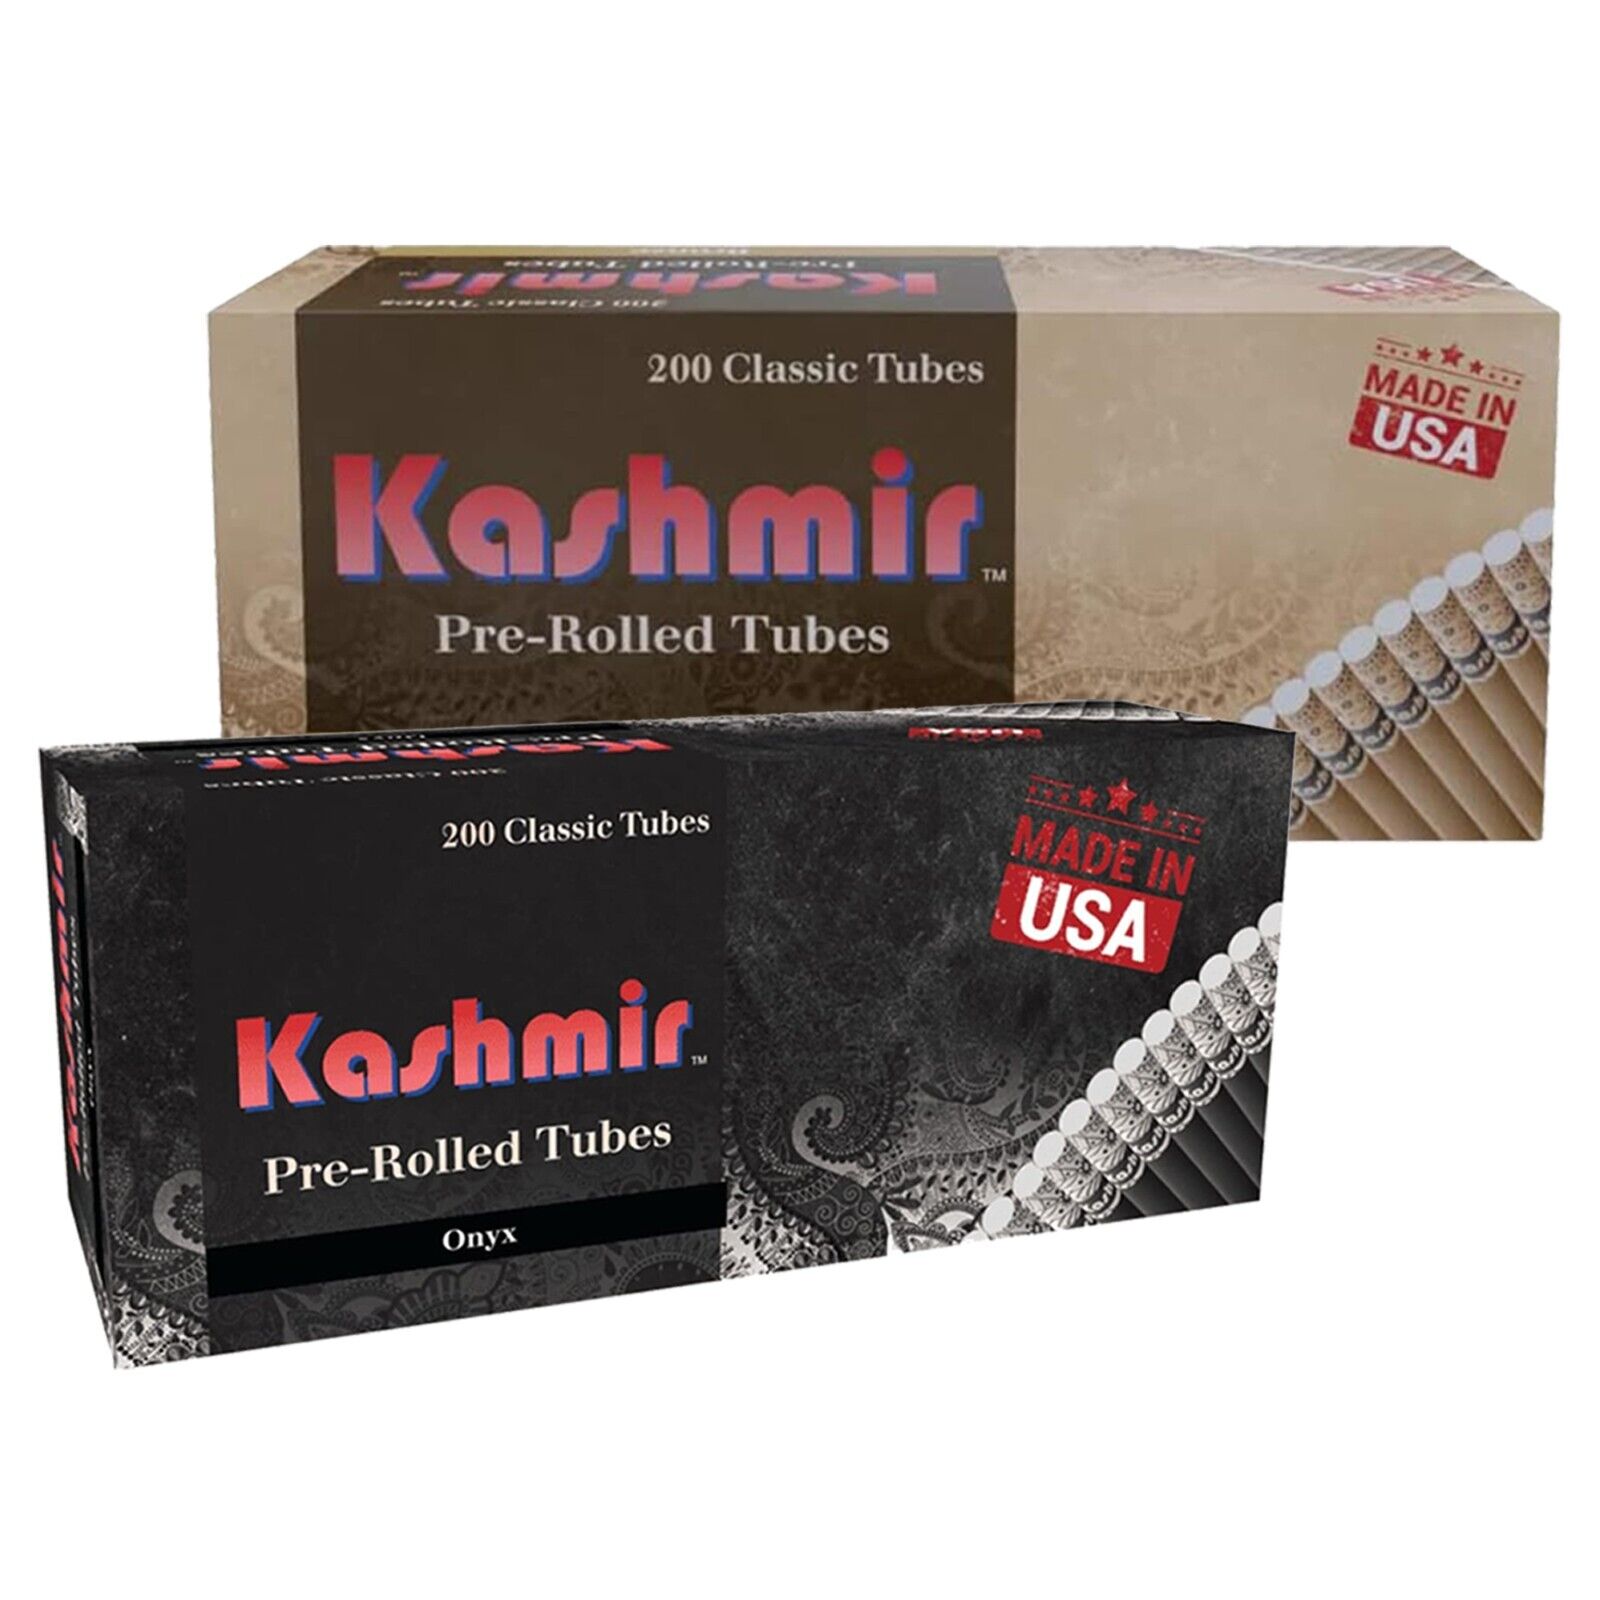 Kashmir Cigarette Tubes Combo Pack of Onyx & Bronze Pre-Rolled Tubes Pack of 2